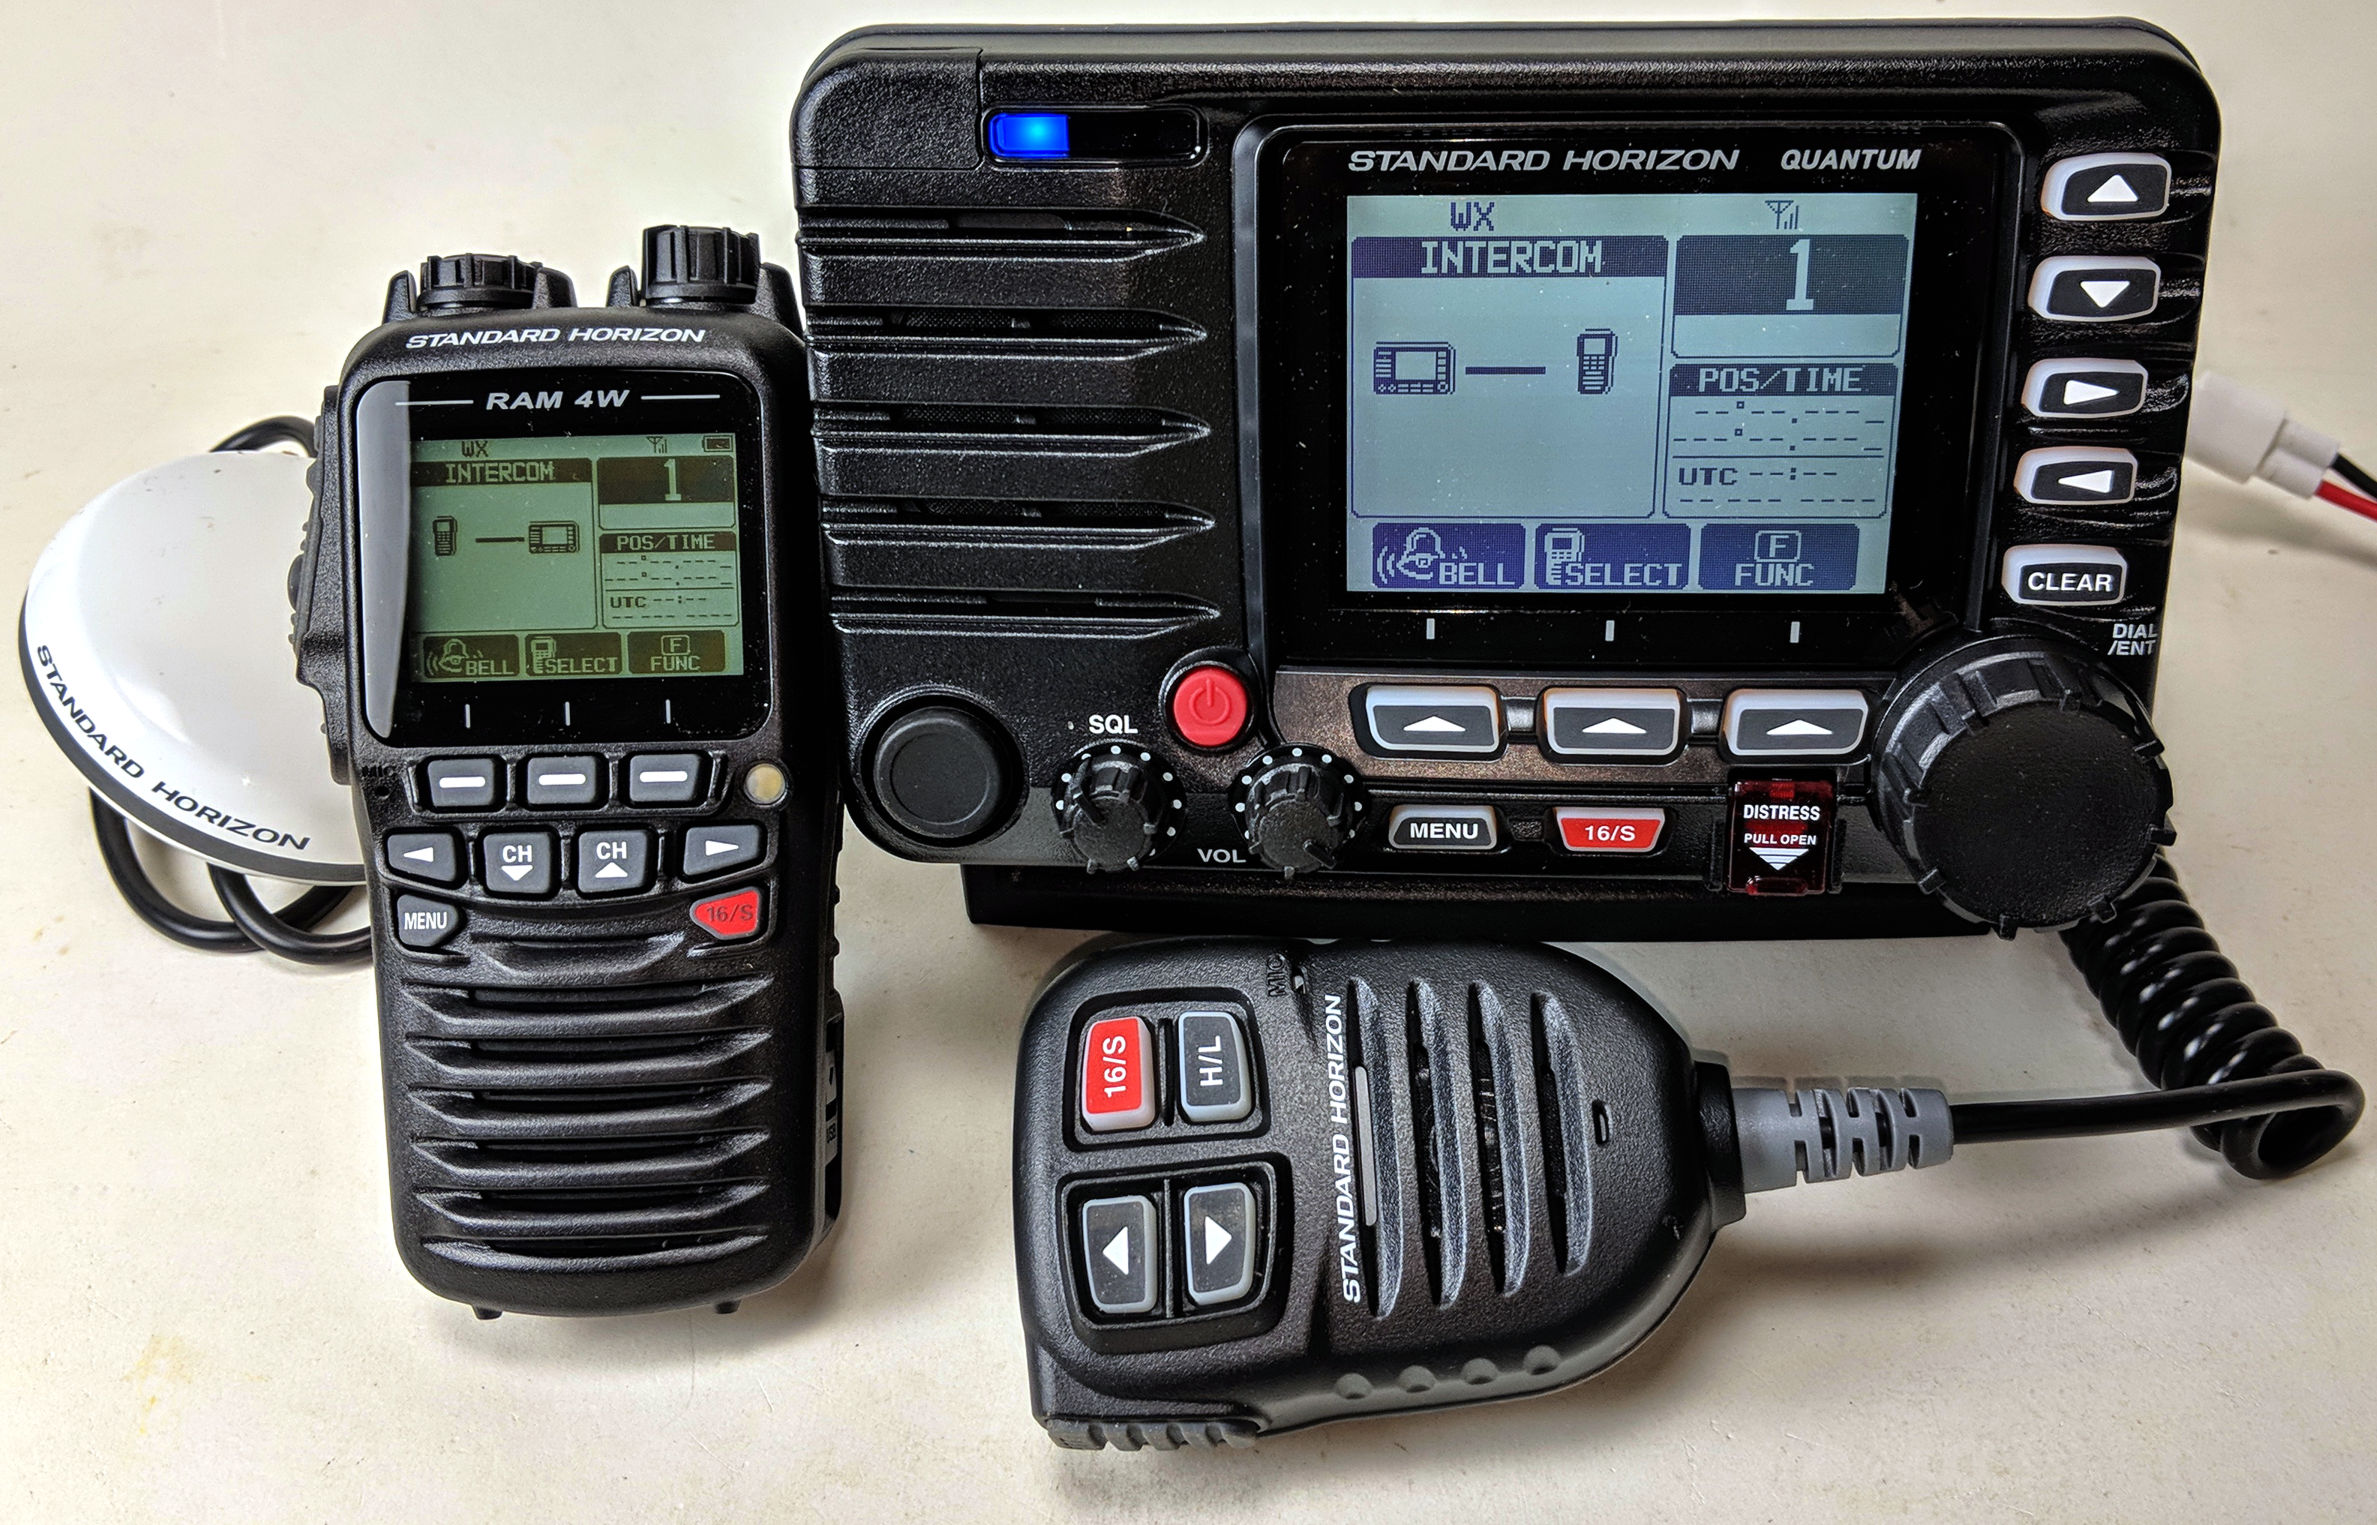 How To Use A VHF Radio On A Boat: Basic Communications - Boat Trader Blog